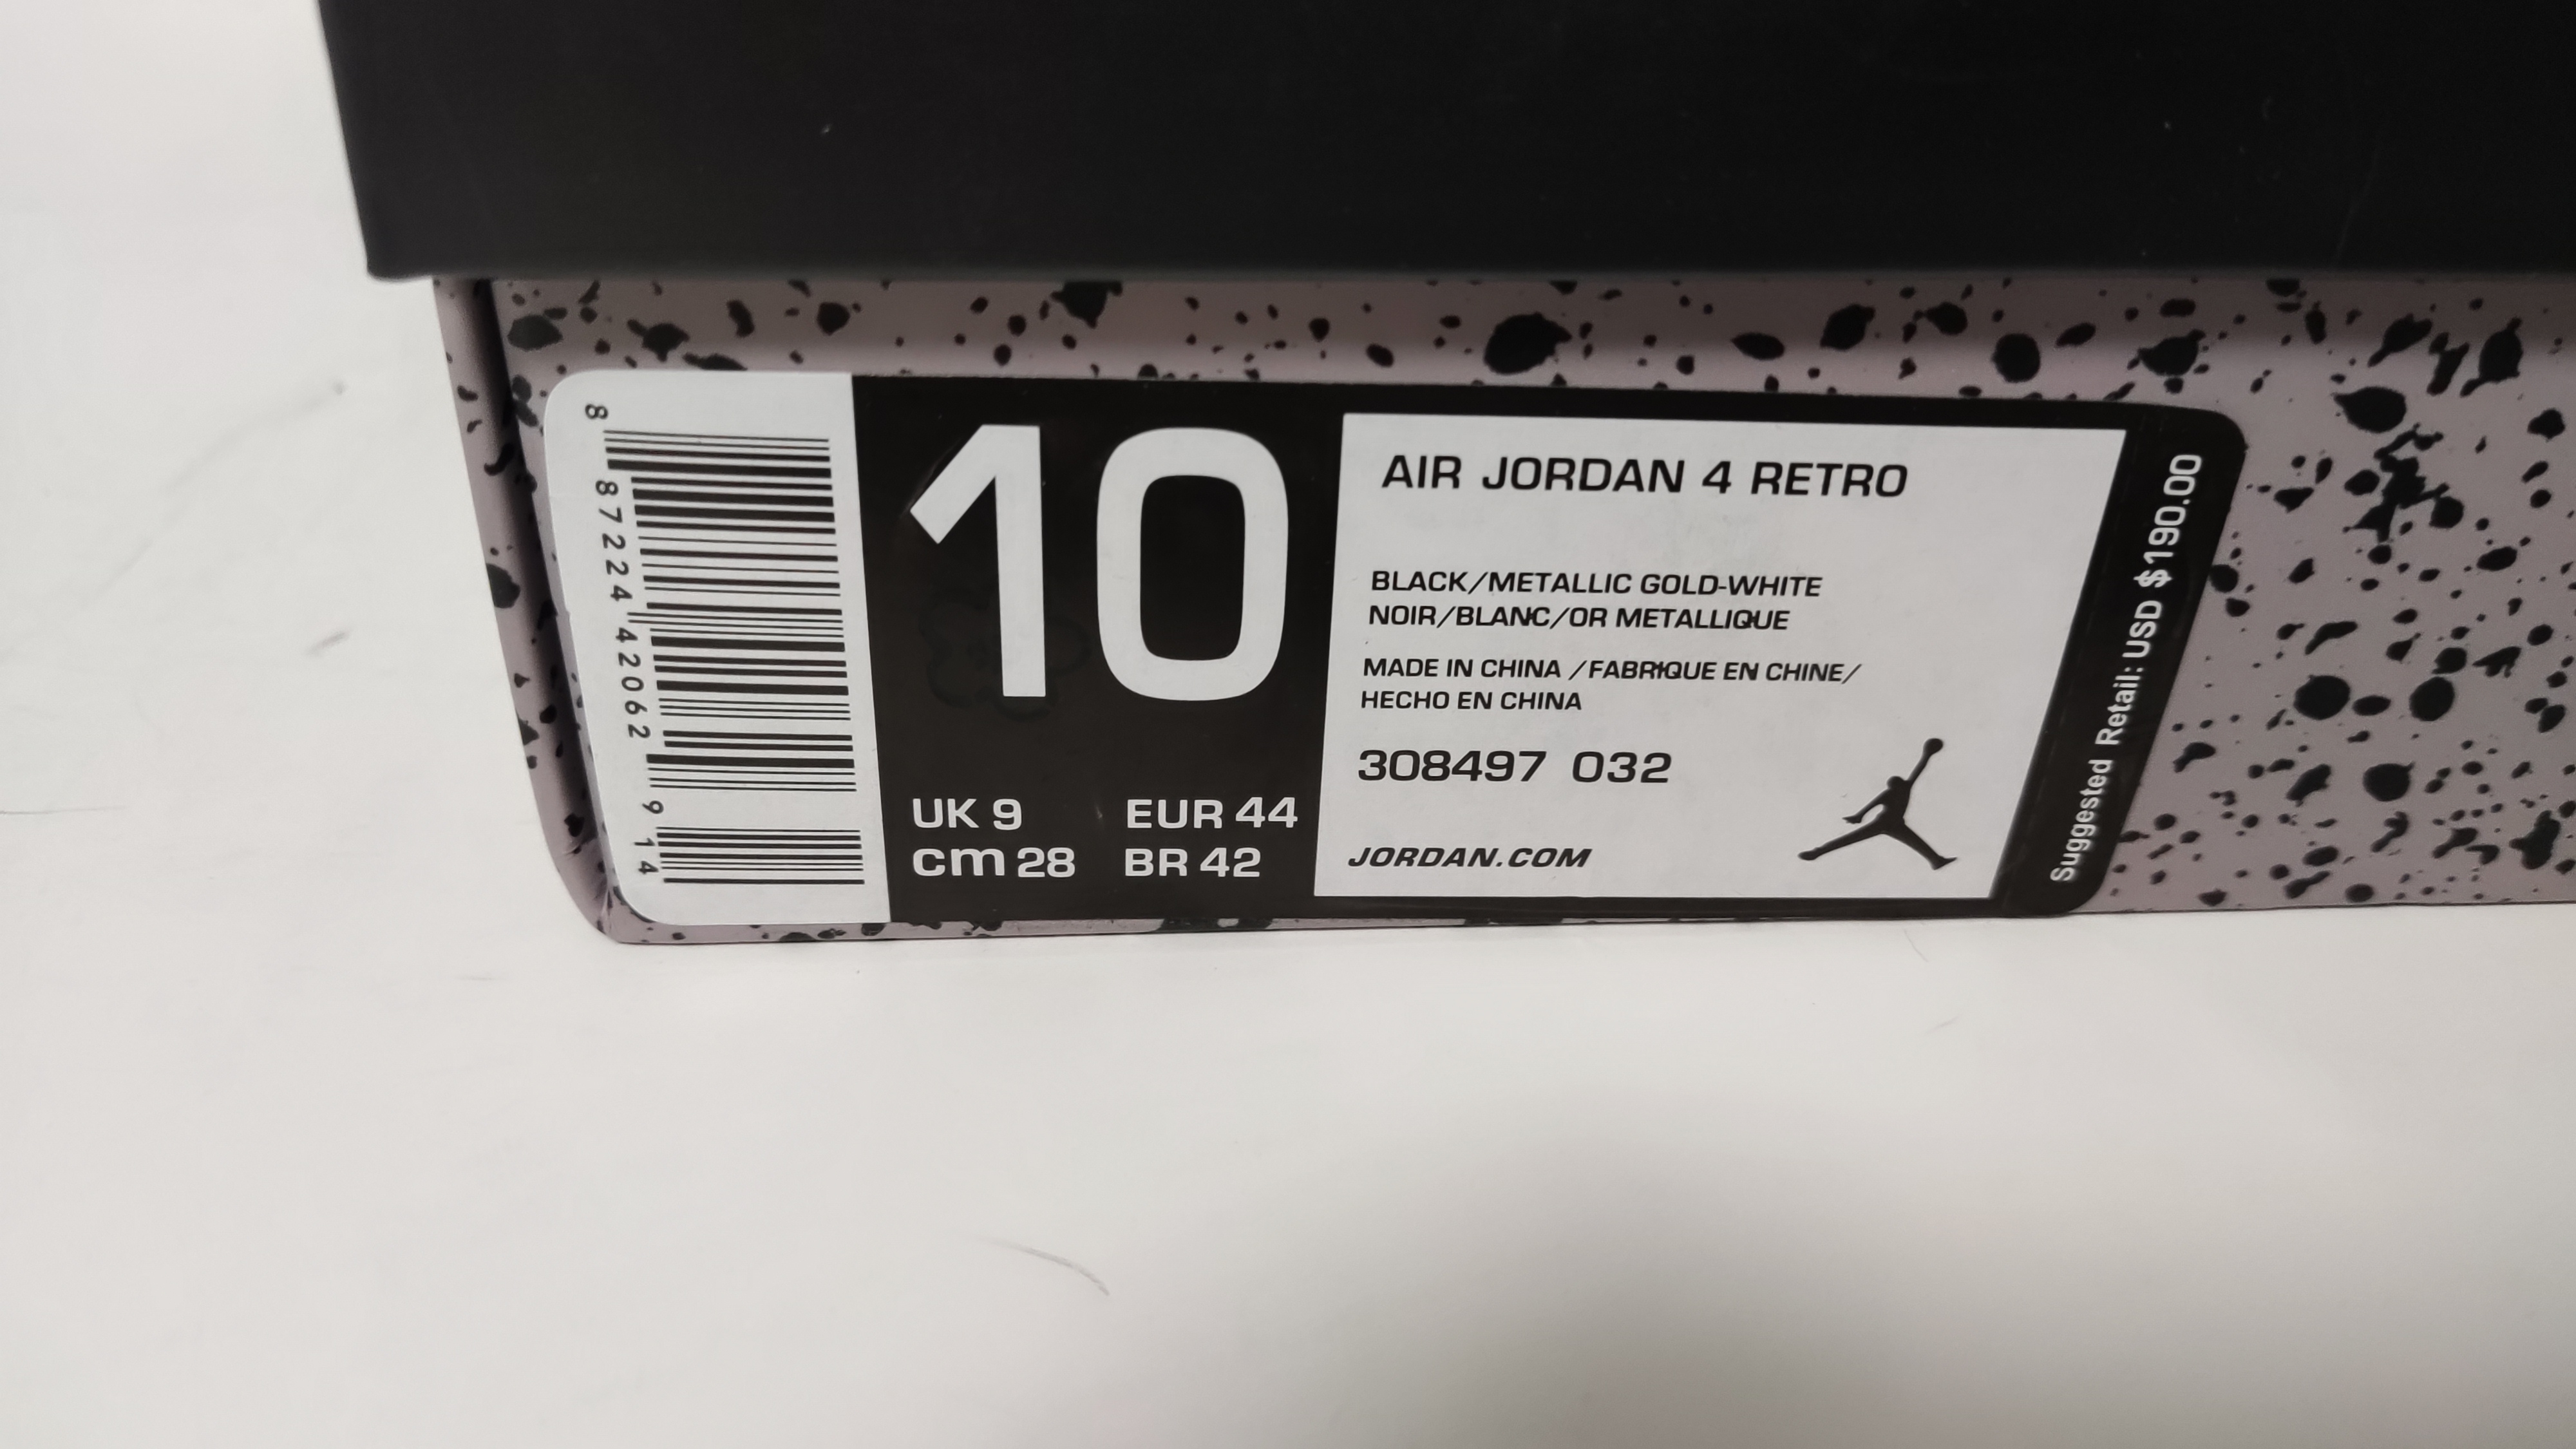 QC Picture Replica Jordan 4 Retro Royalty From Jdfoot